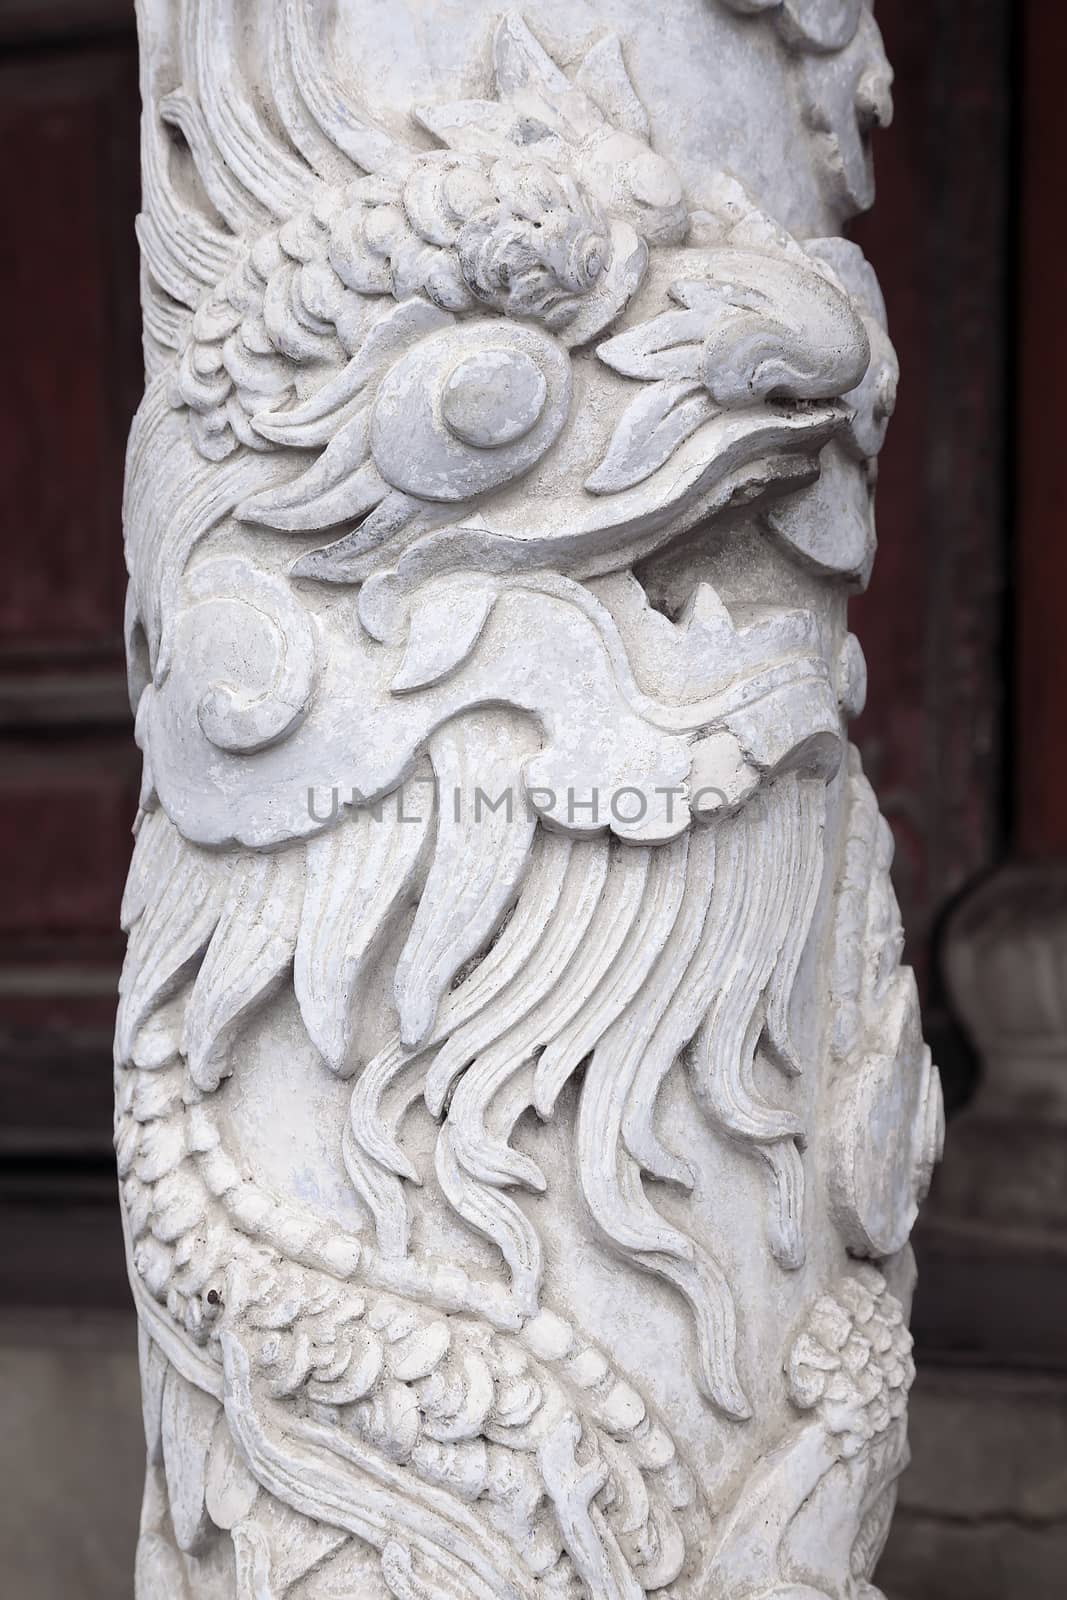 Dragon decoration in Imperial Palace in Hue, Vietnam by Goodday